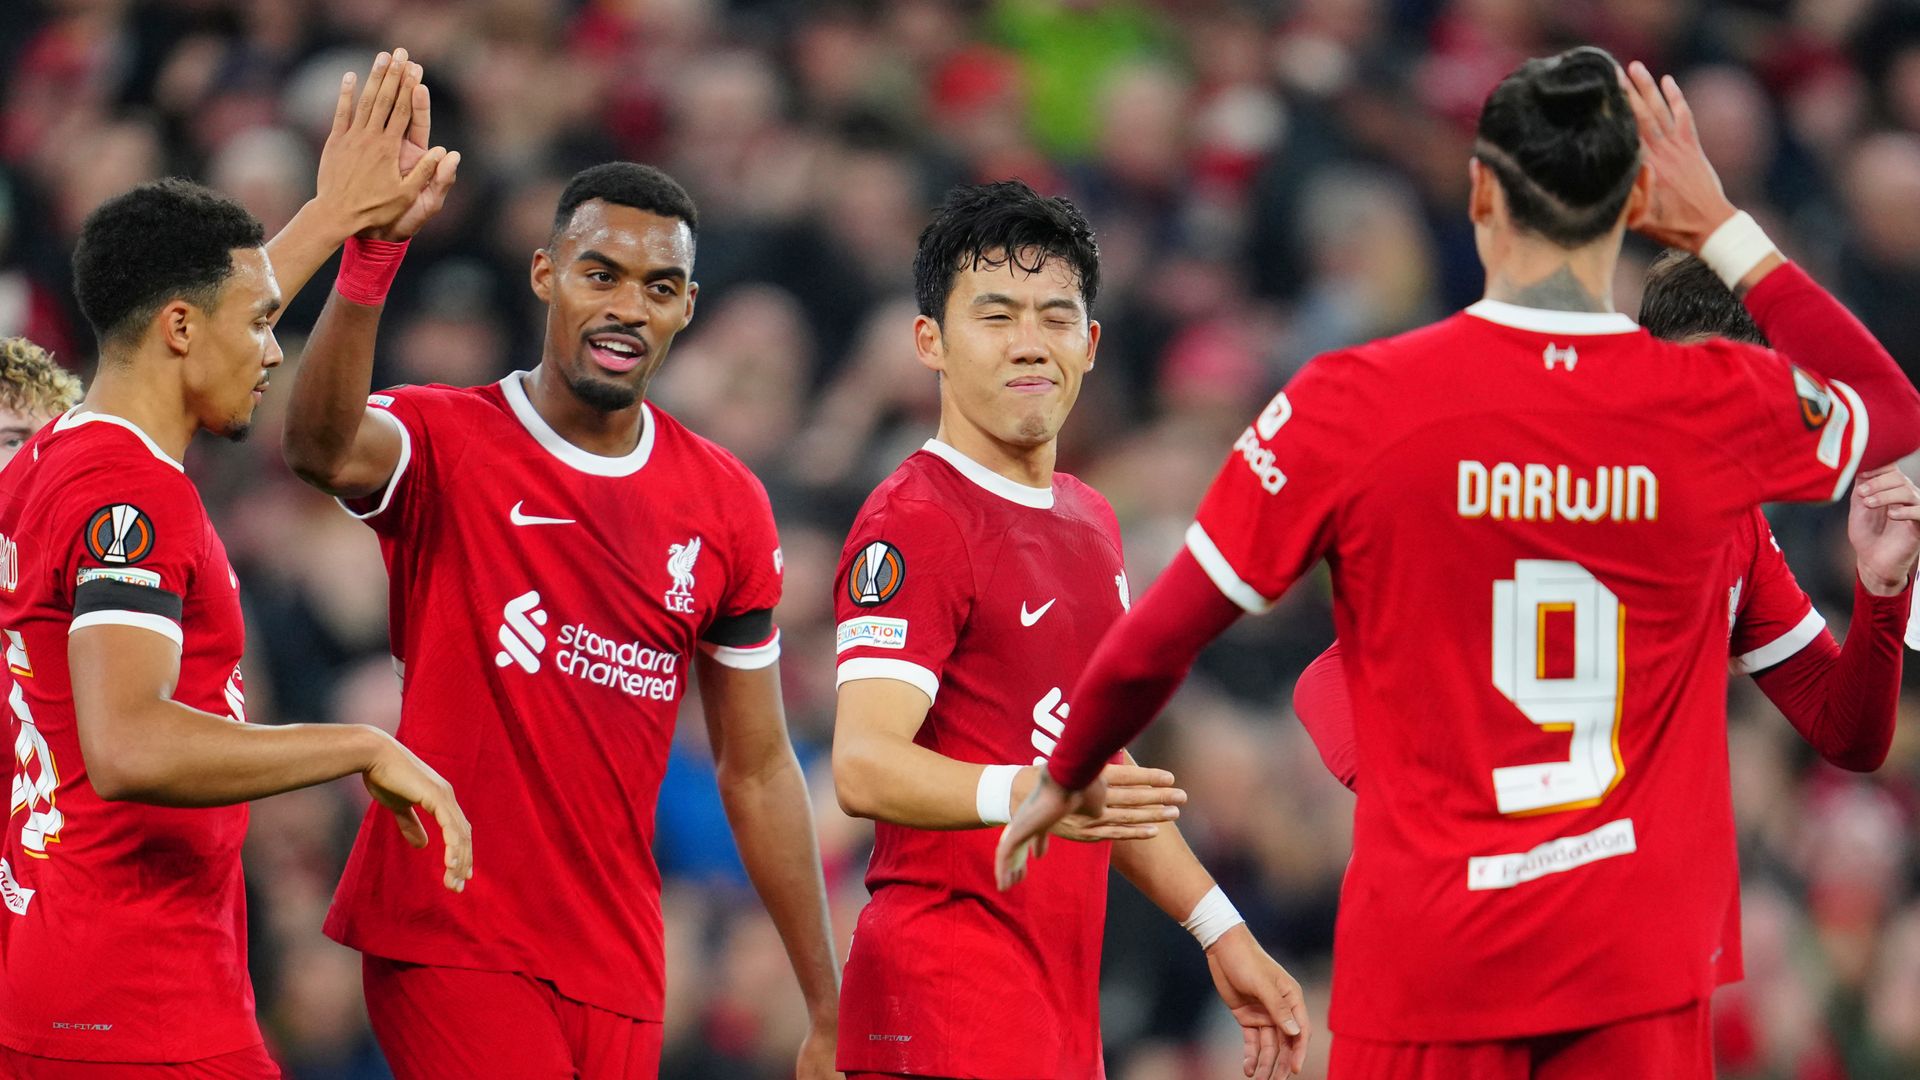 Europa preview: Liverpool without Van Dijk and Gravenberch